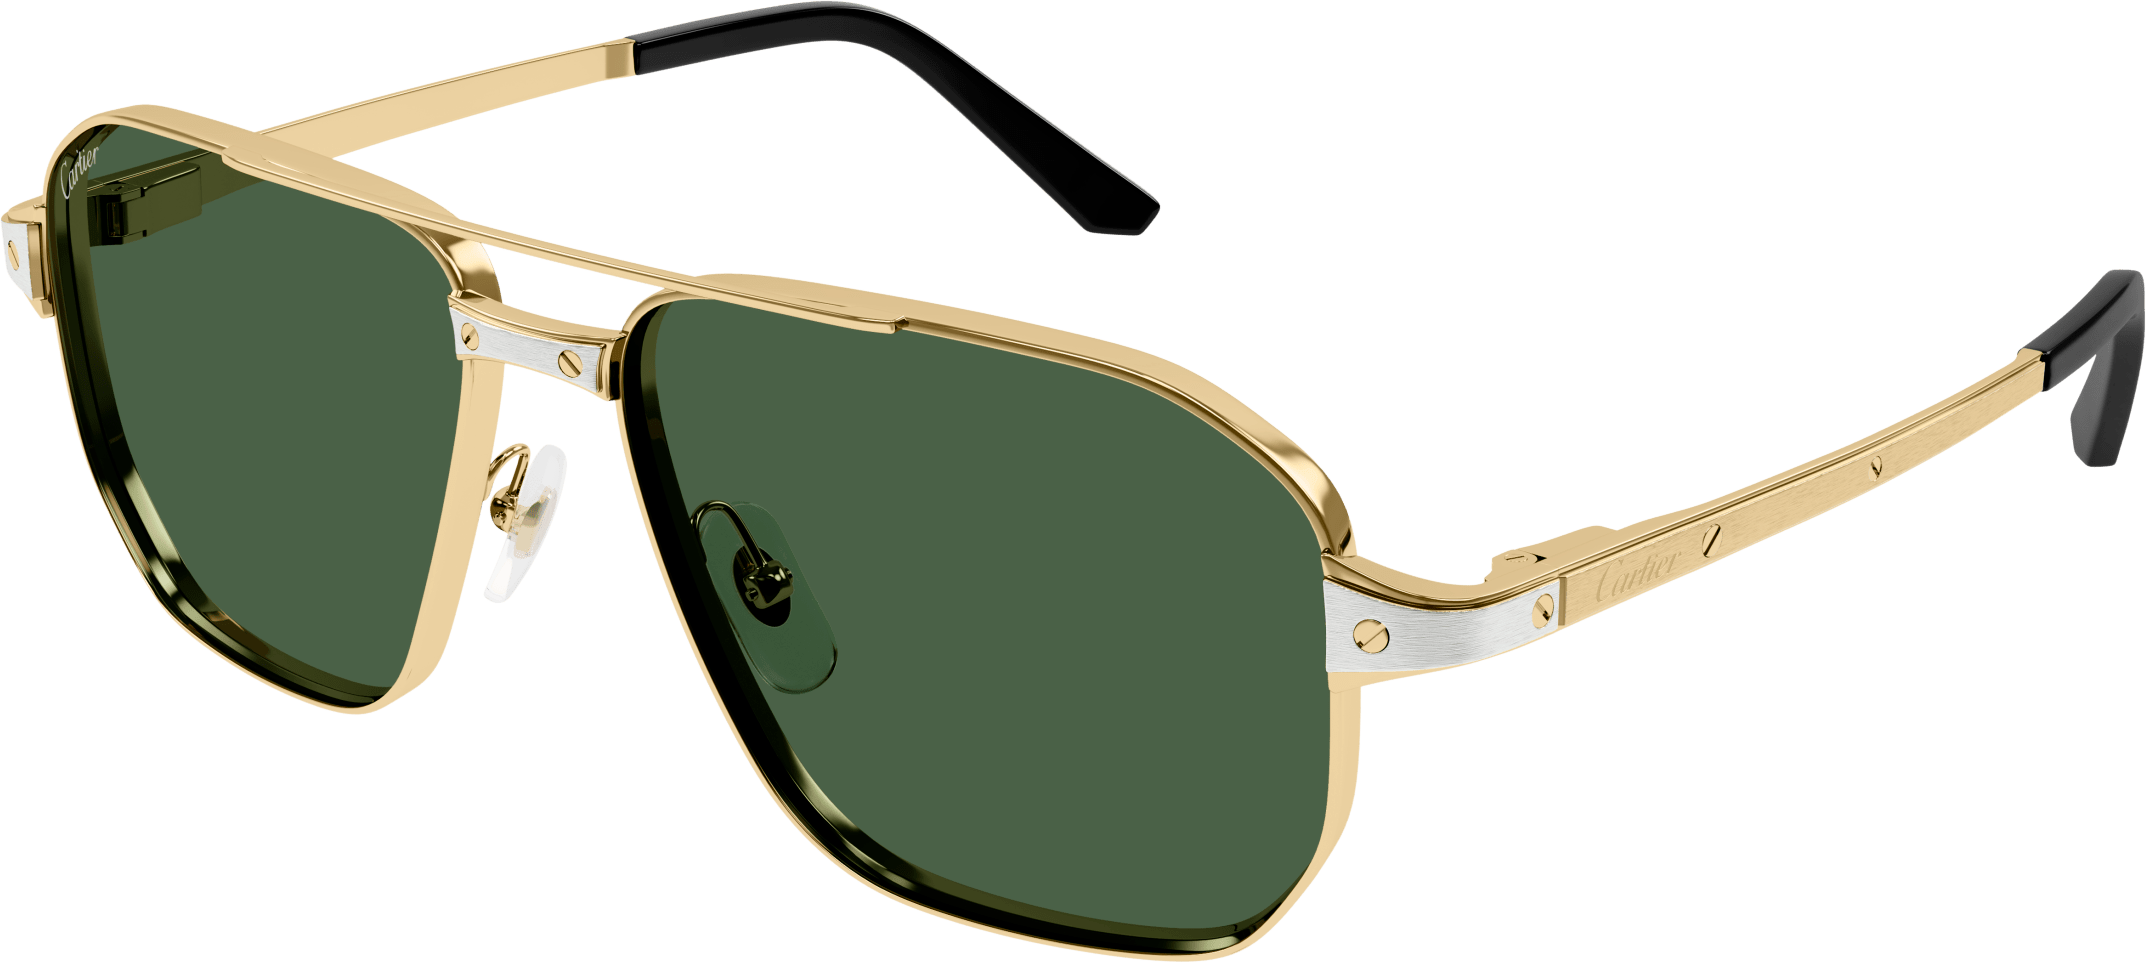 Color_CT0424S-002 - GOLD - GREEN - AR (ANTI REFLECTIVE) - POLARIZED